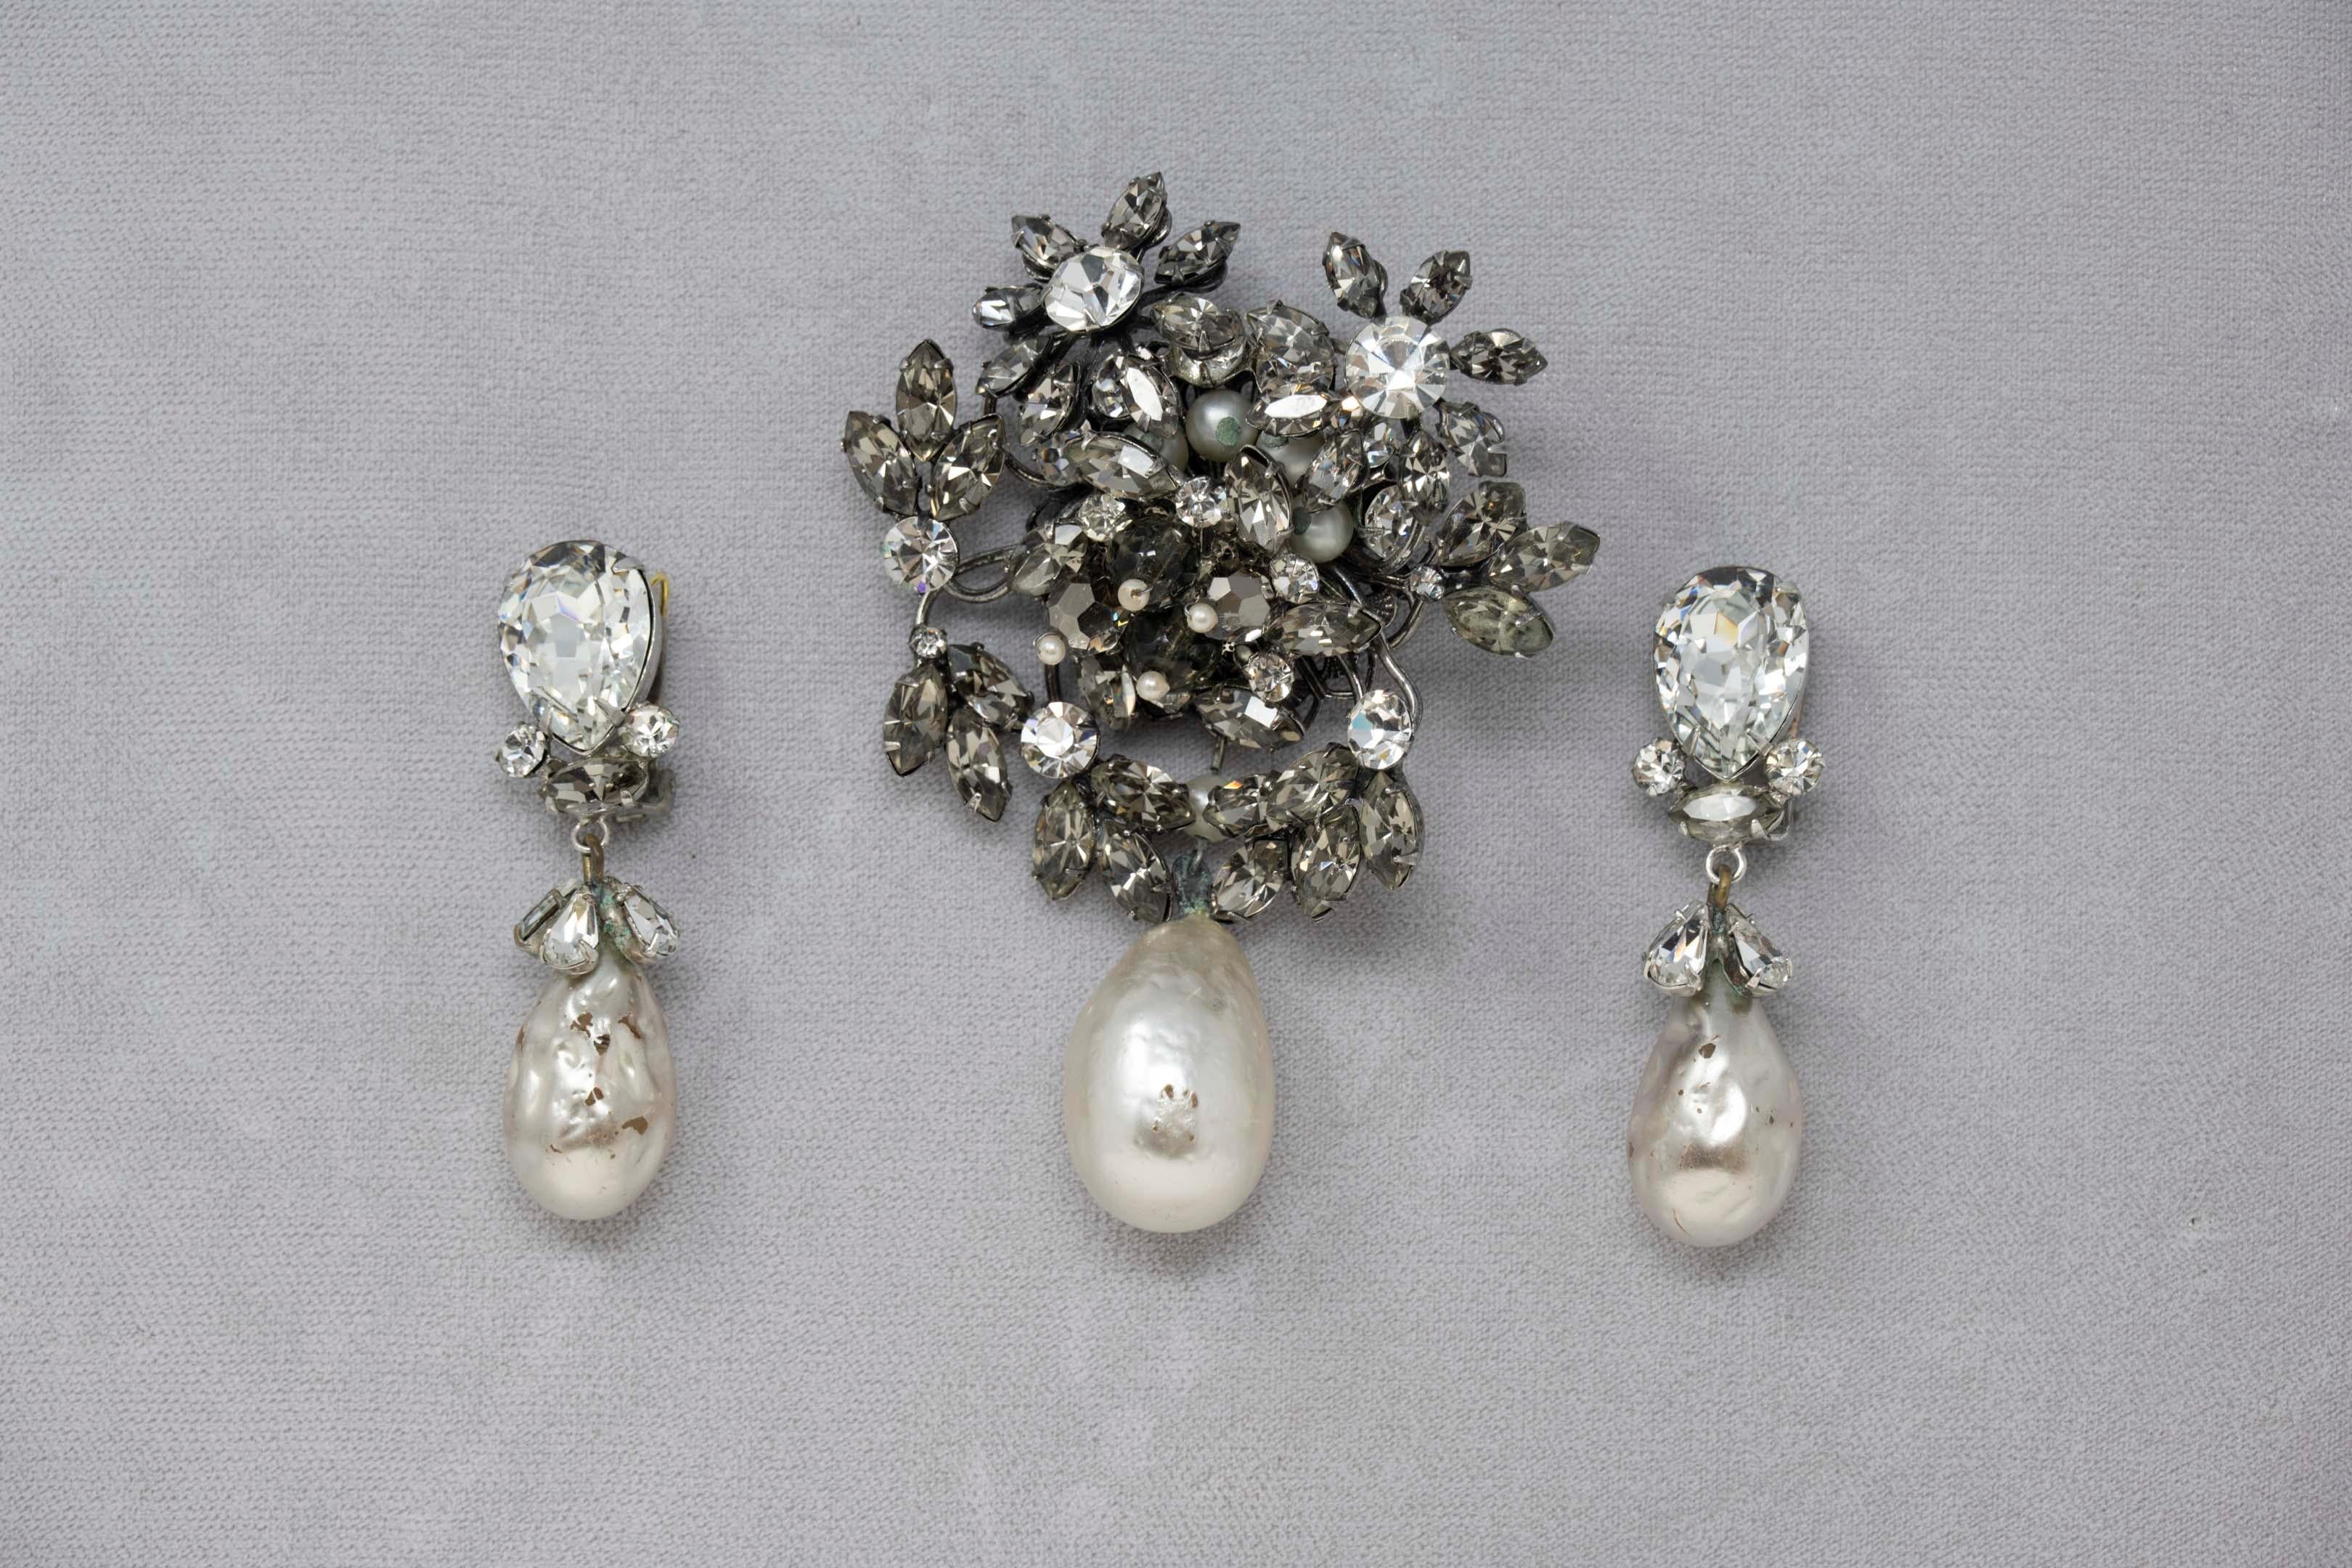 Original by Robert faux pearls and rhinestones brooch & clip-on earrings. Mid 20th century, 1960, crystal pearl and measures 2 1/2 inches in diameter, 2 1/4 inches long. Wear consistent with age, scratches on the pearls.
